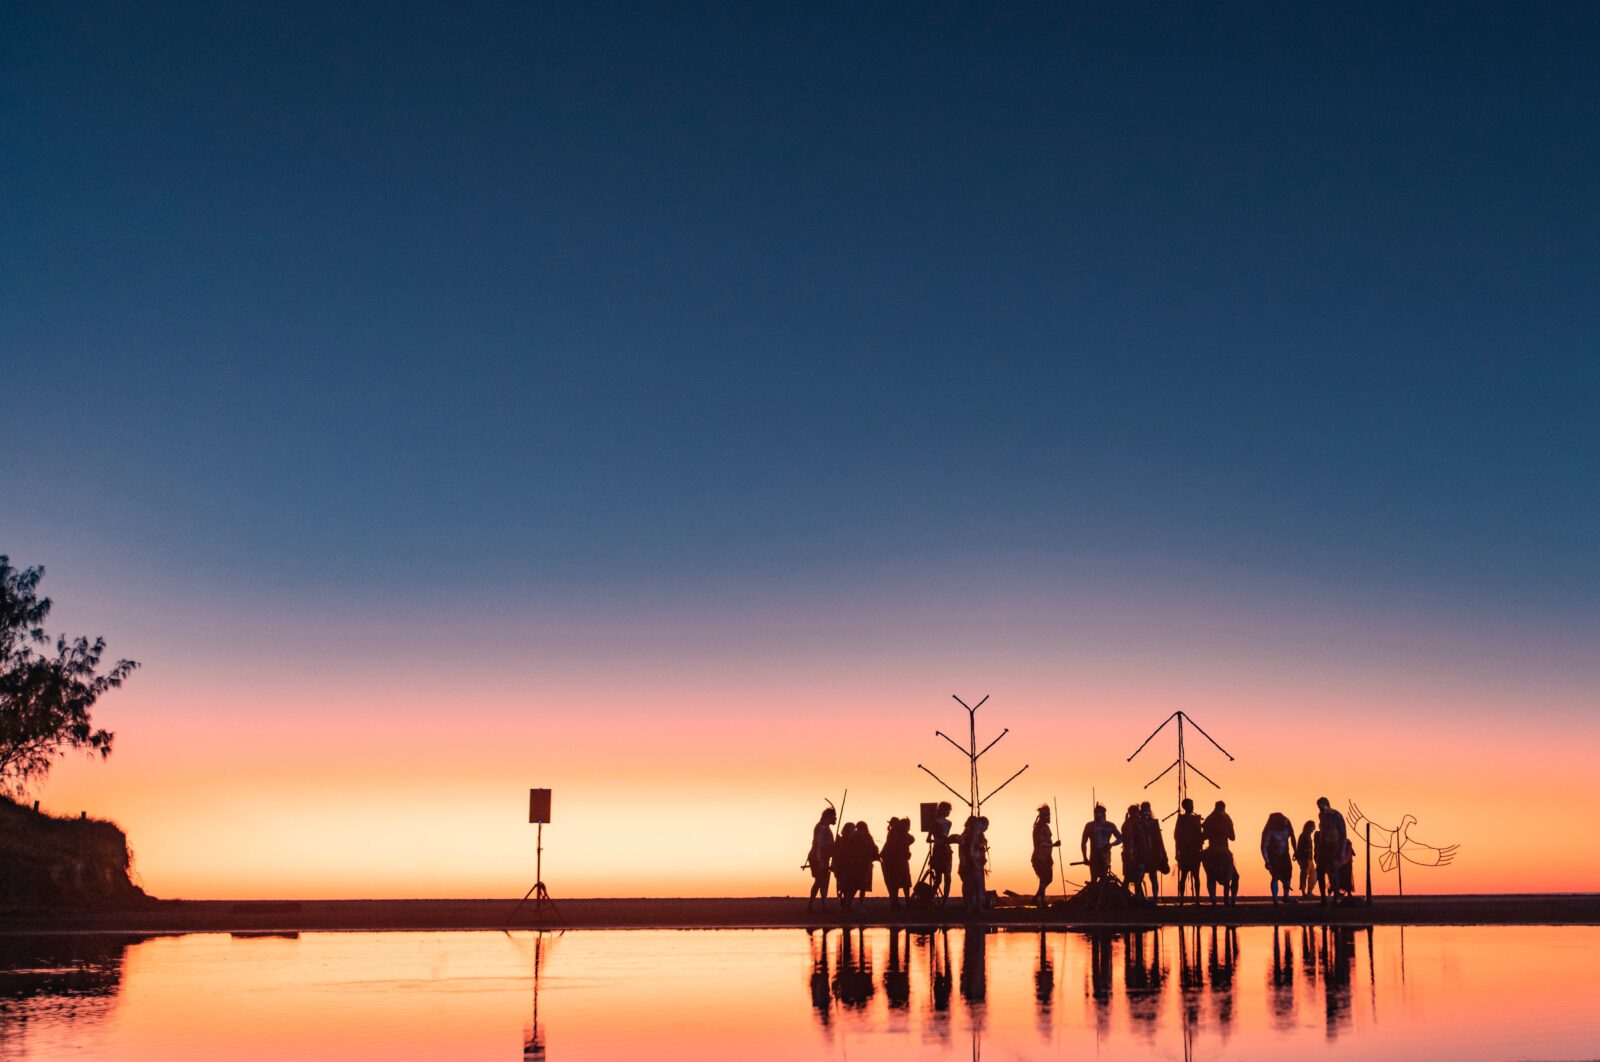 Performers gathered on a beach at dawn